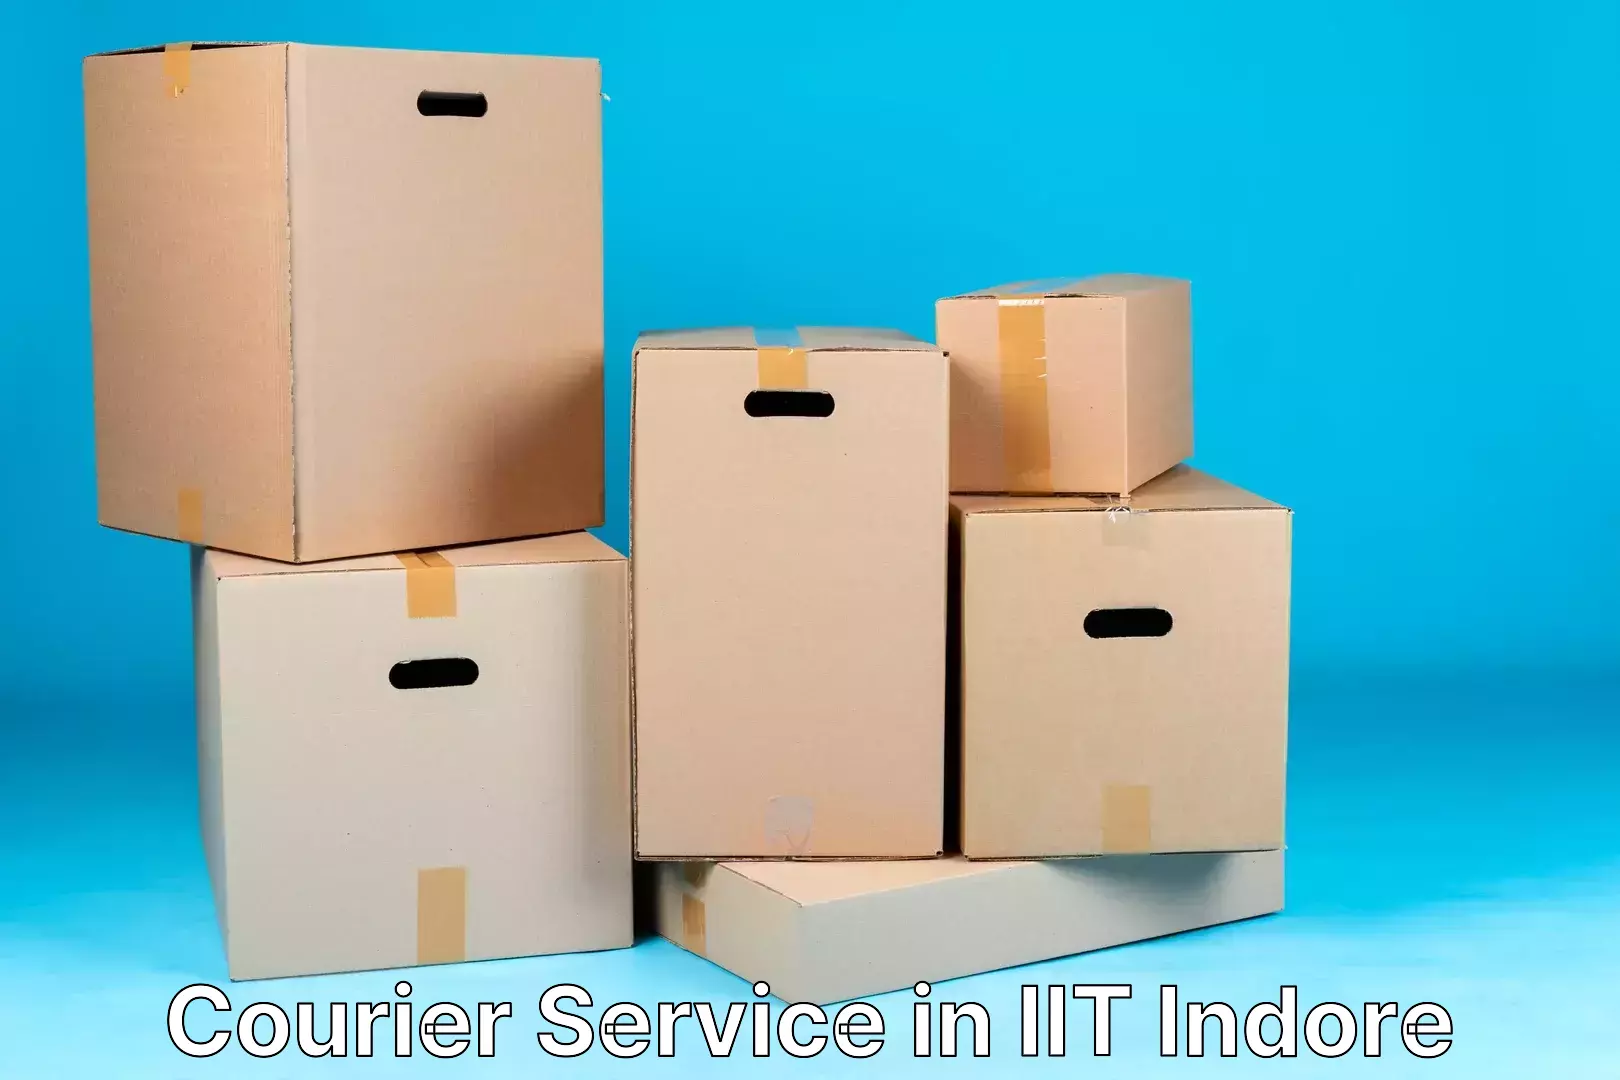 Tailored freight services in IIT Indore